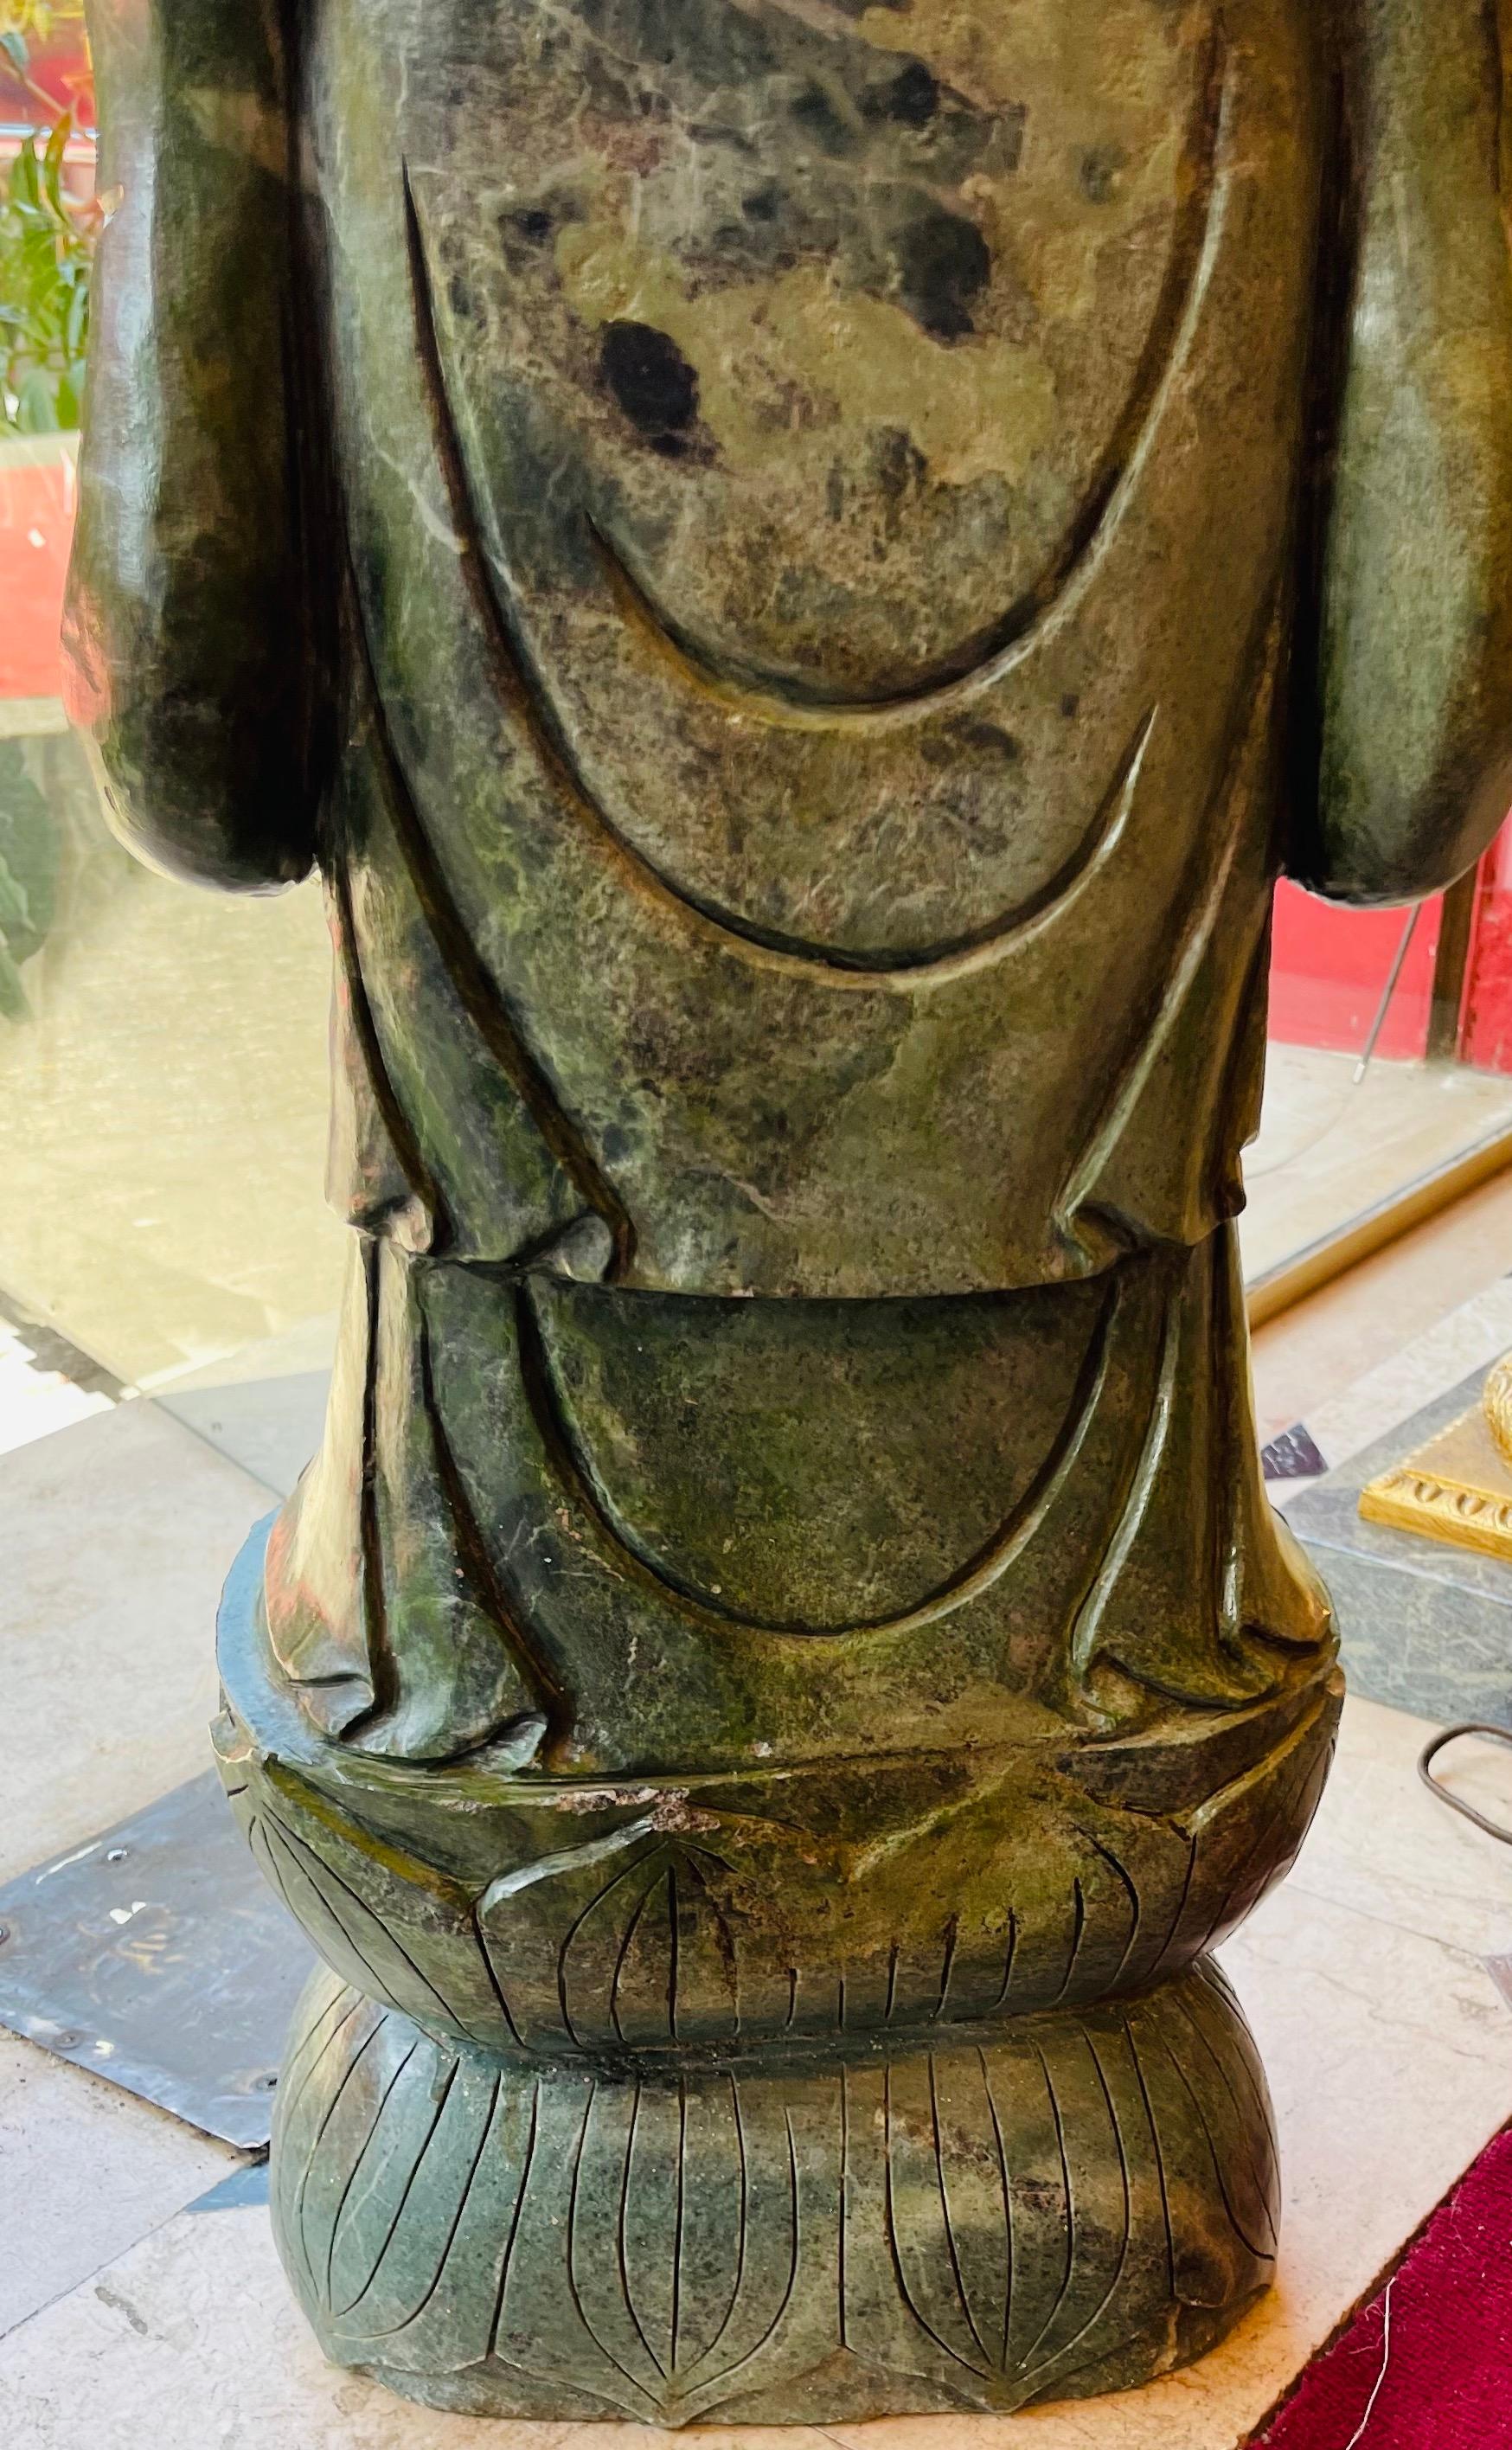 Chinoiserie Large Laughing Buddha Statue - Green Hard Stone - China - Period: Art Nouveau For Sale